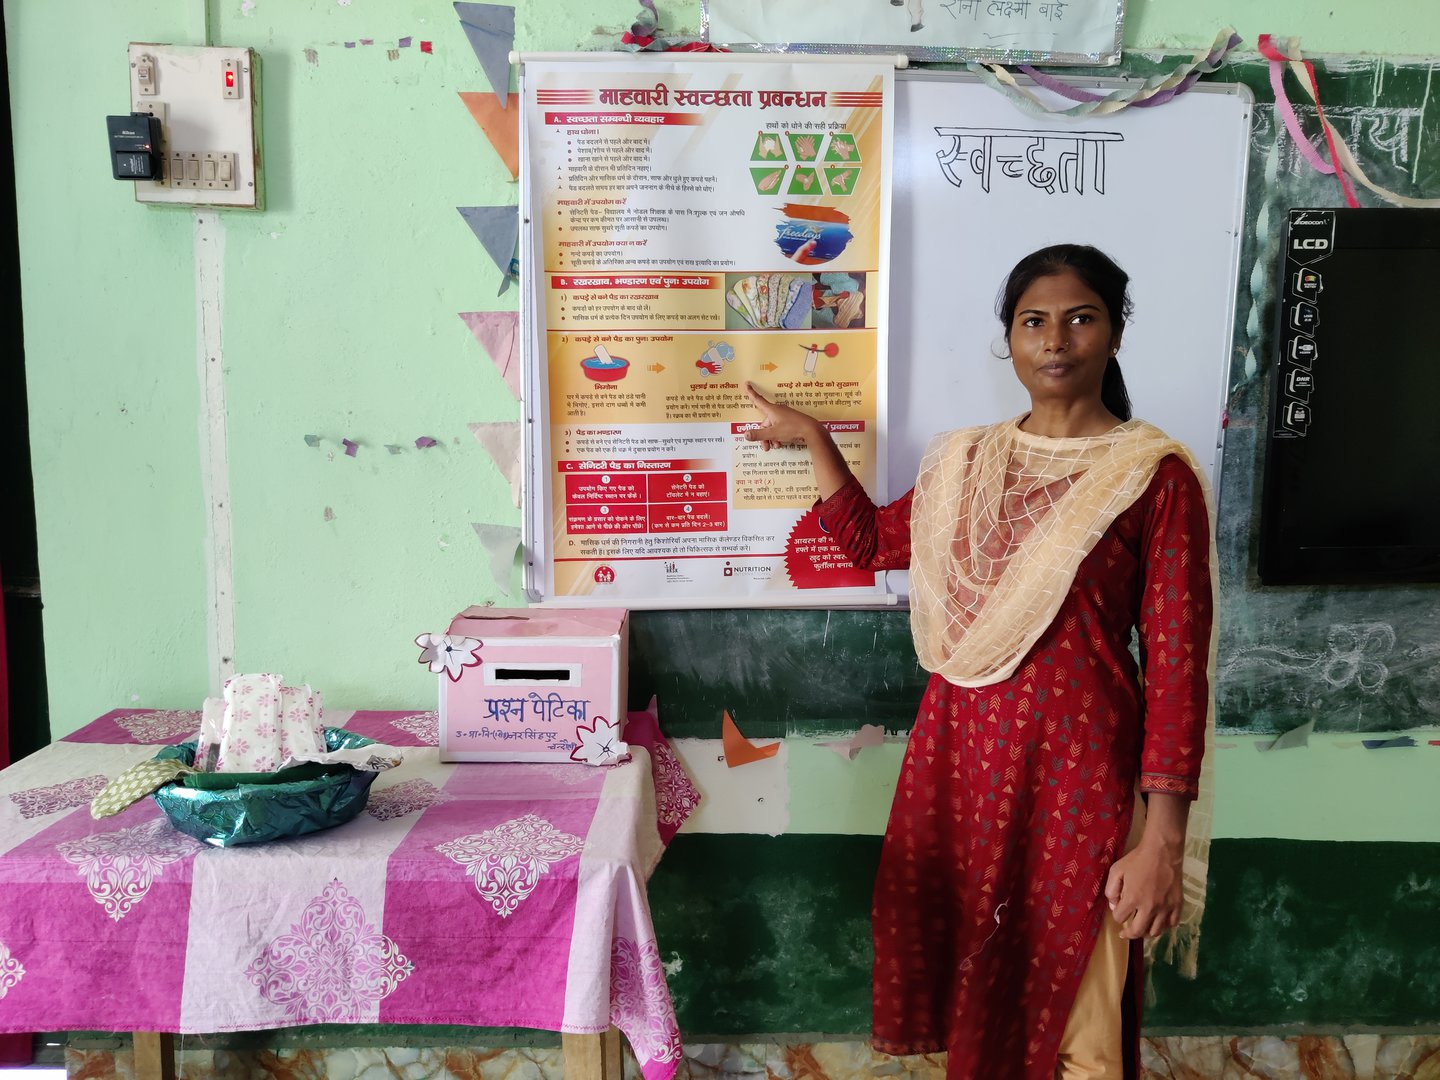 Teacher in a red kurta stands in front of a poster in a classroom. She is pointing at the poster as she looks at the camera.